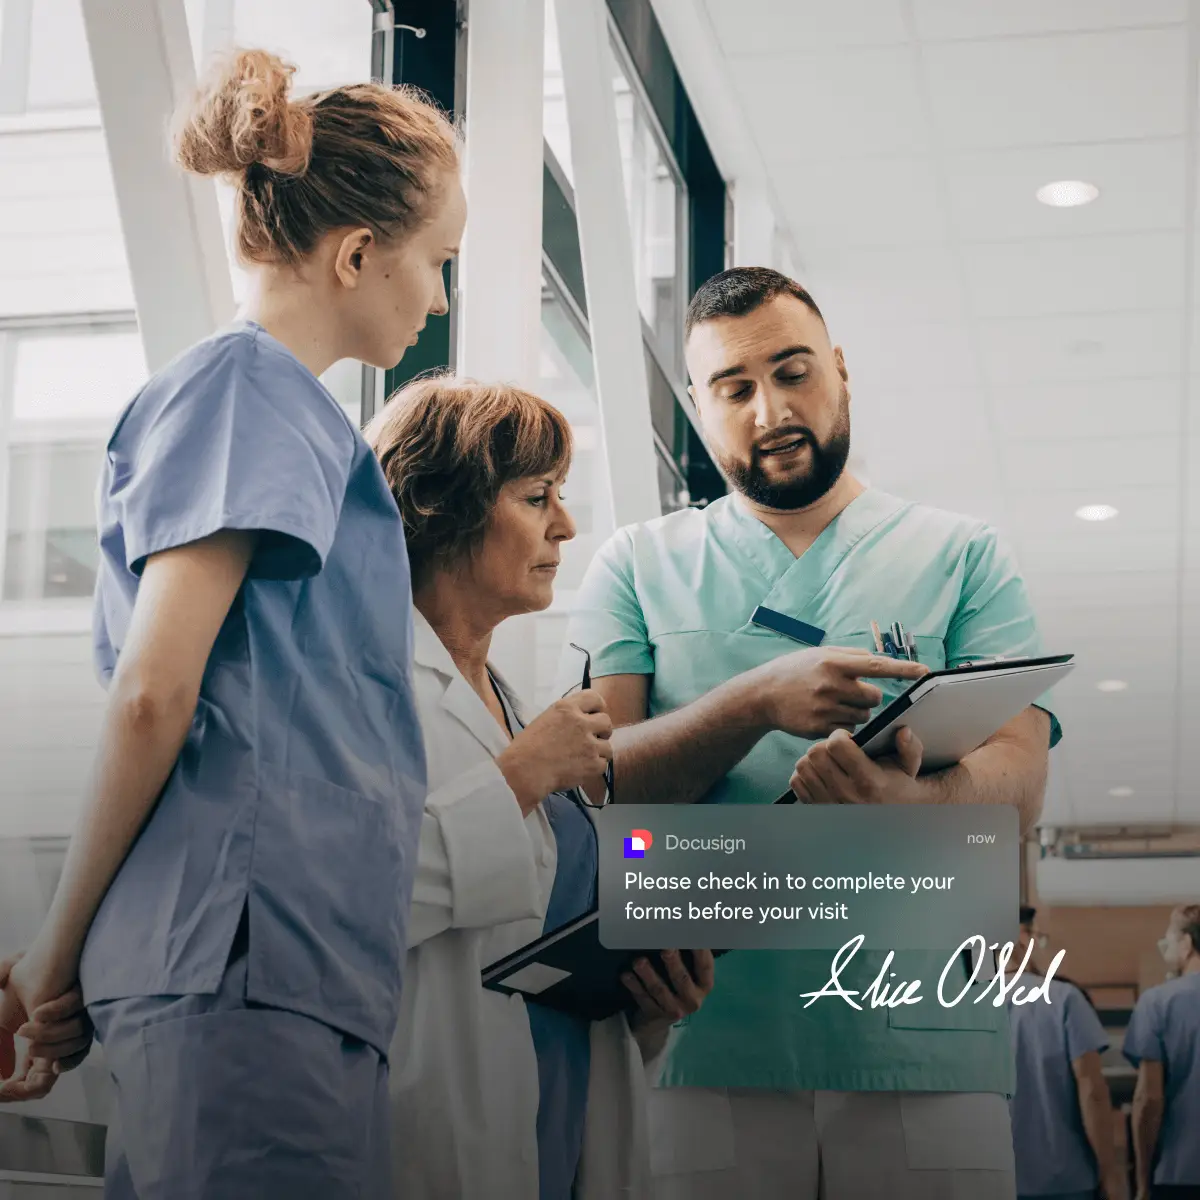 A notification in DocuSign prompts a patient to complete forms before their visit